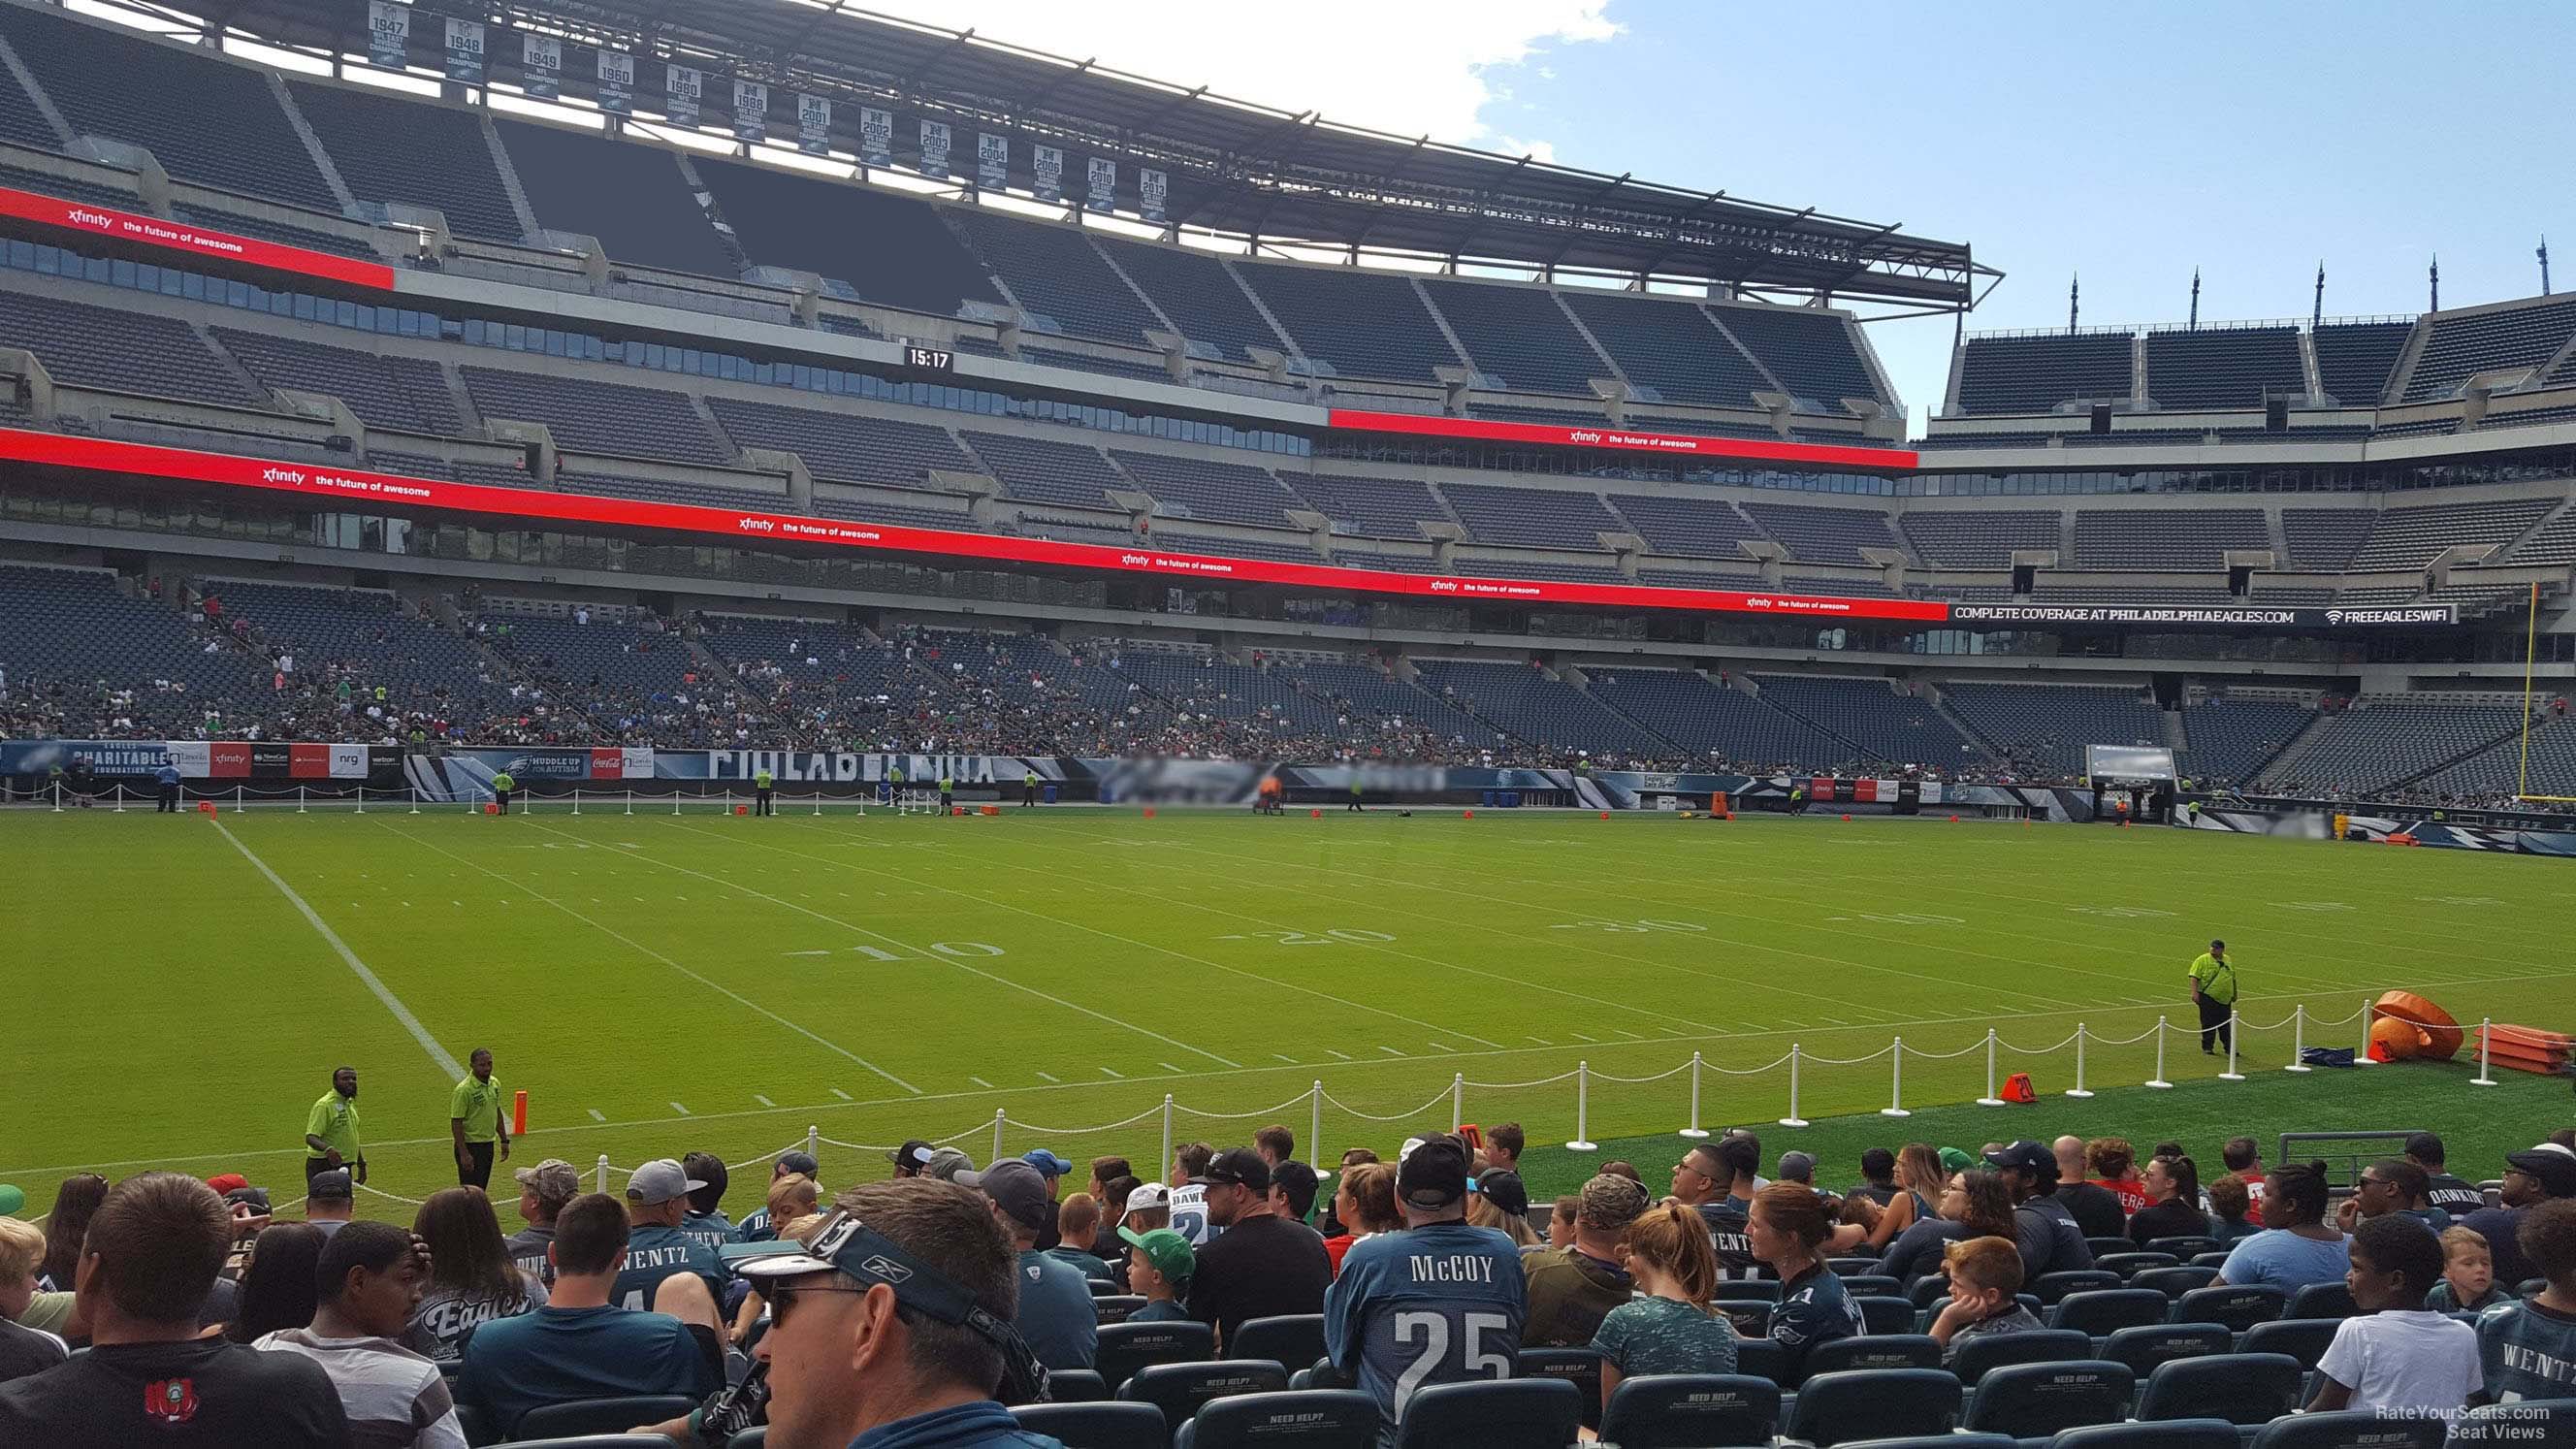 section 135, row 12 seat view  for football - lincoln financial field